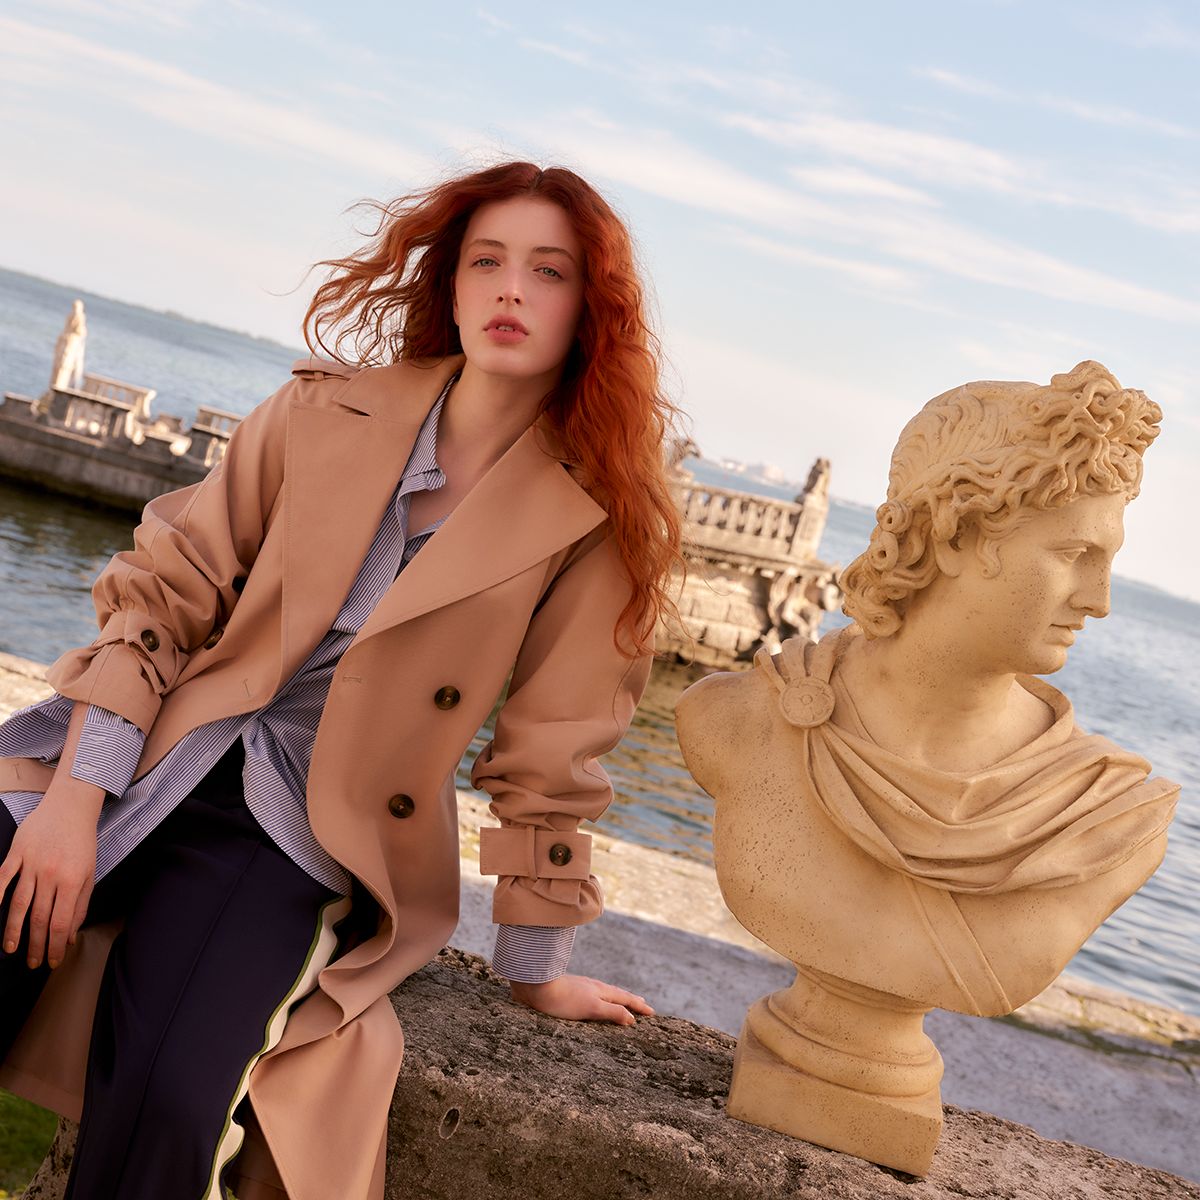 Image of a lady with red hair, sitting on the side of the harbour wearing a trench coat